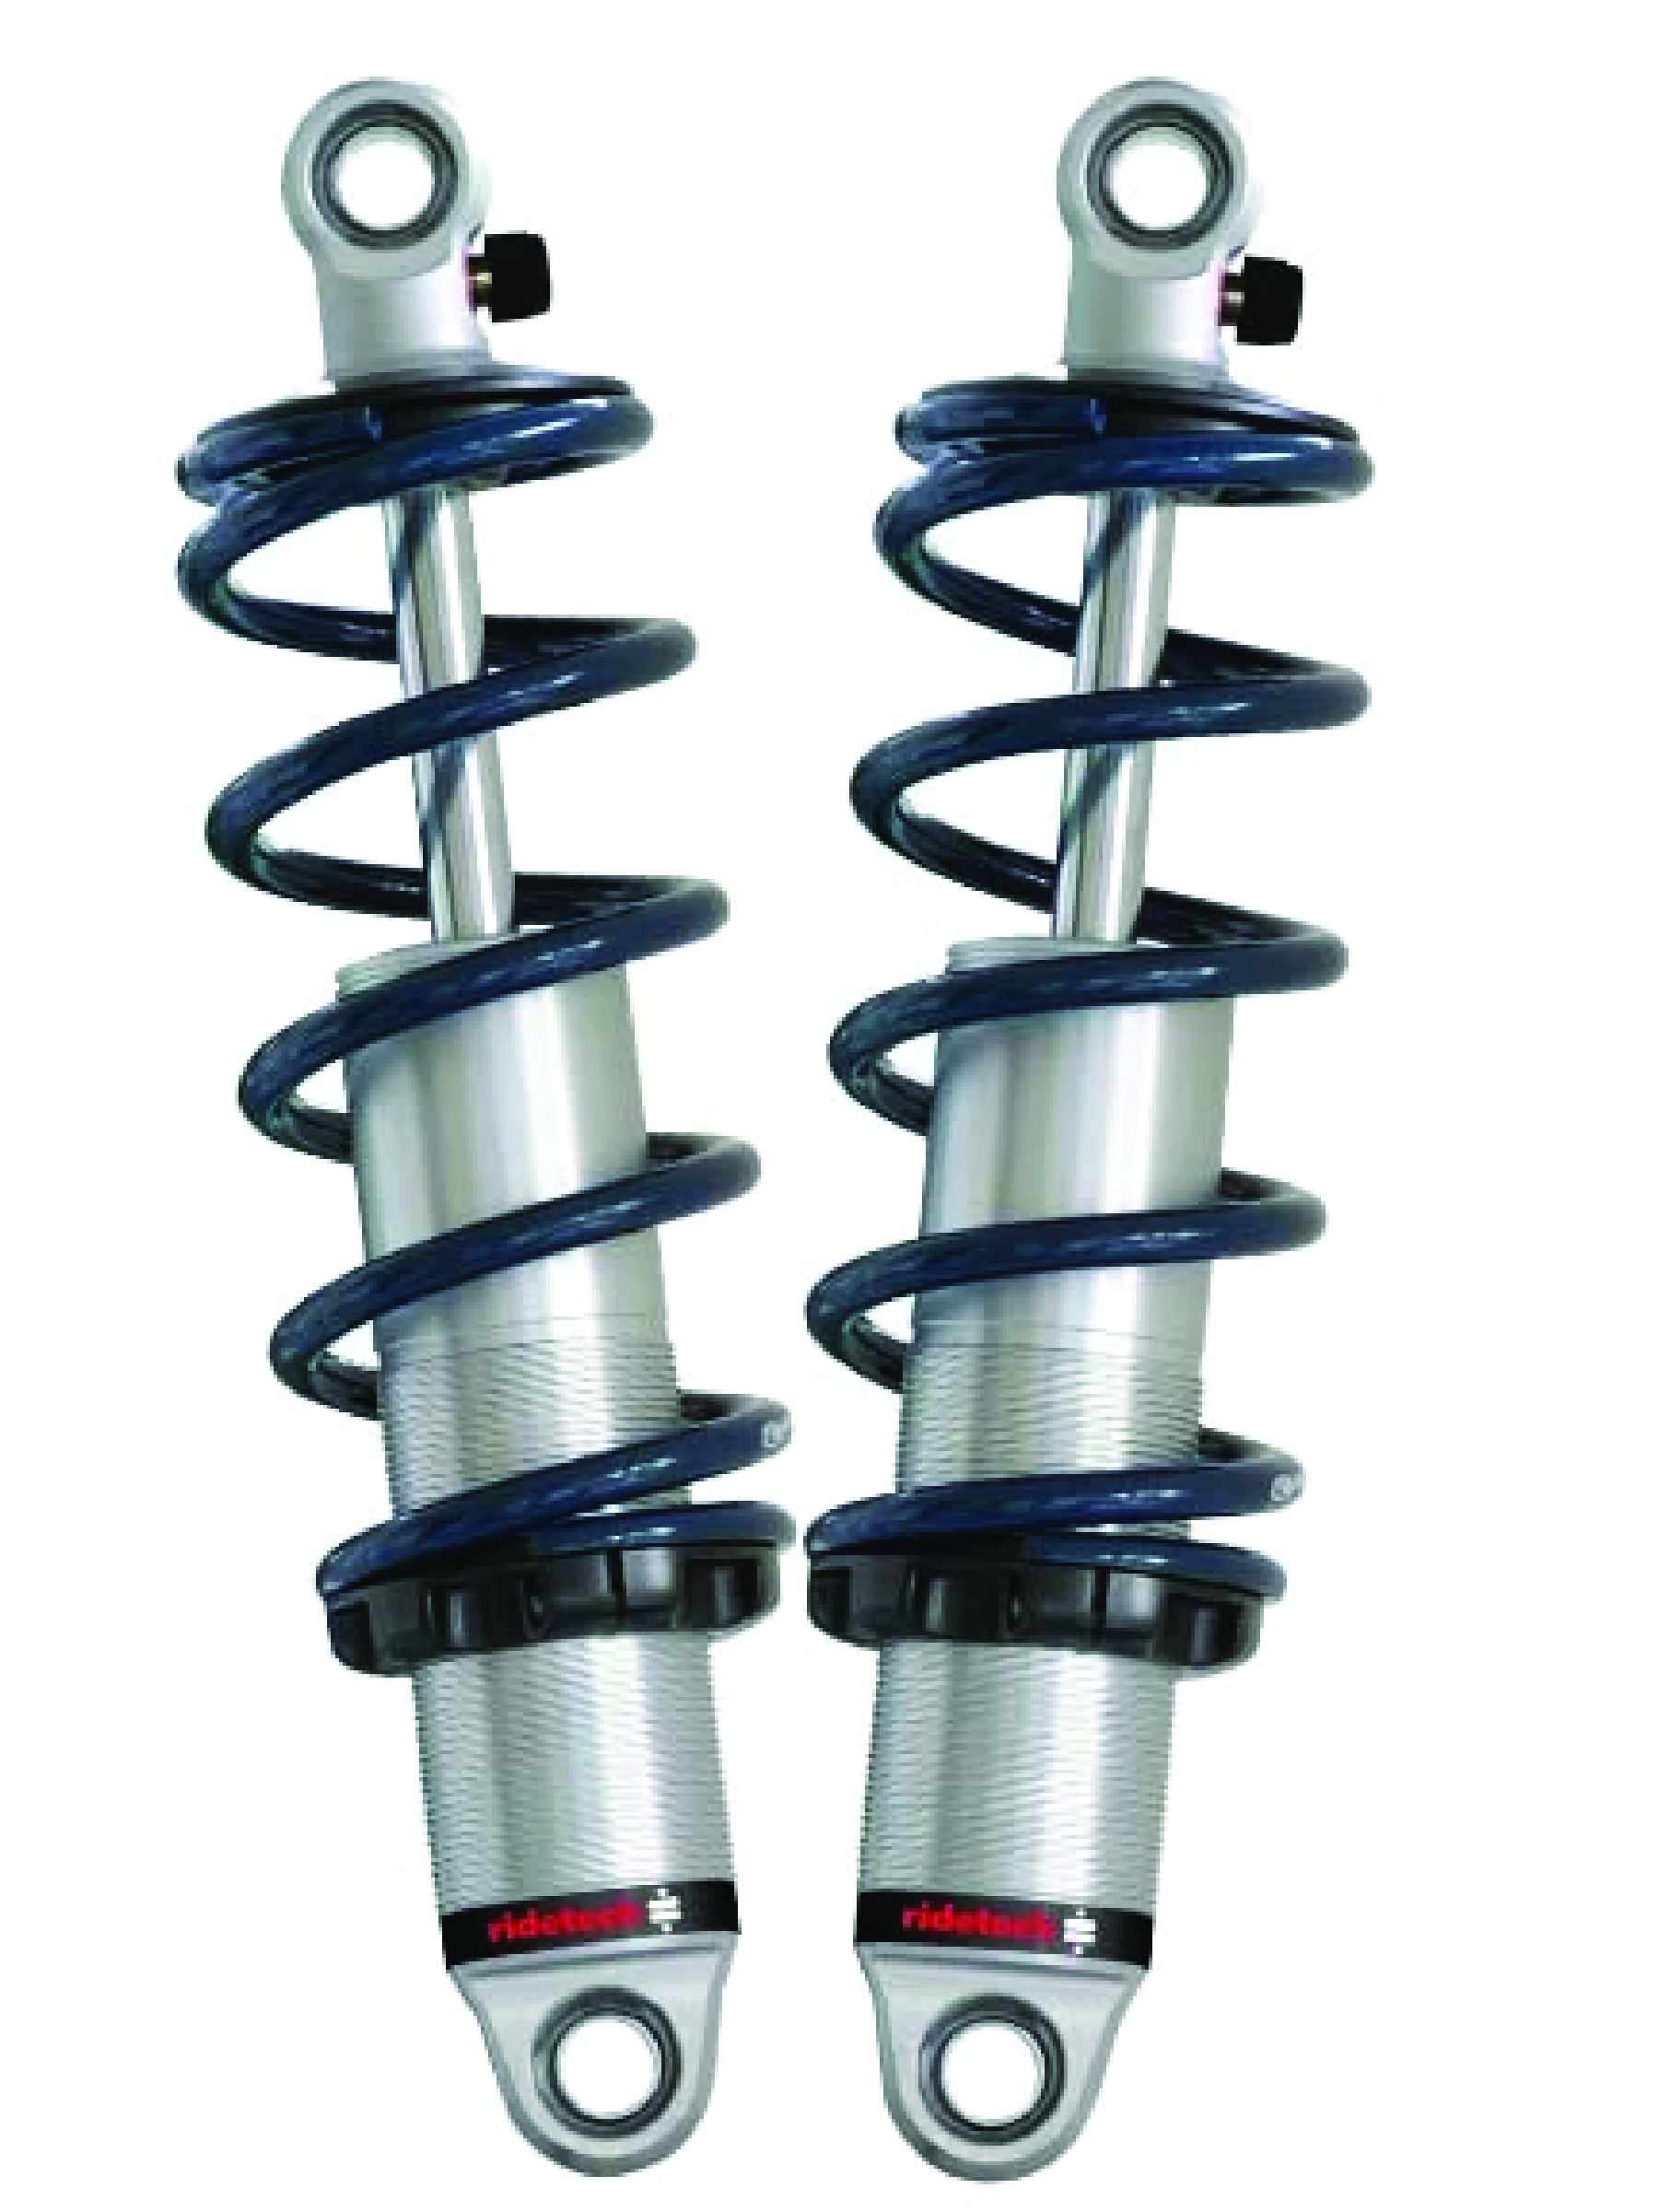 Rear HQ Coil-Overs for use with Ridetech 4-link